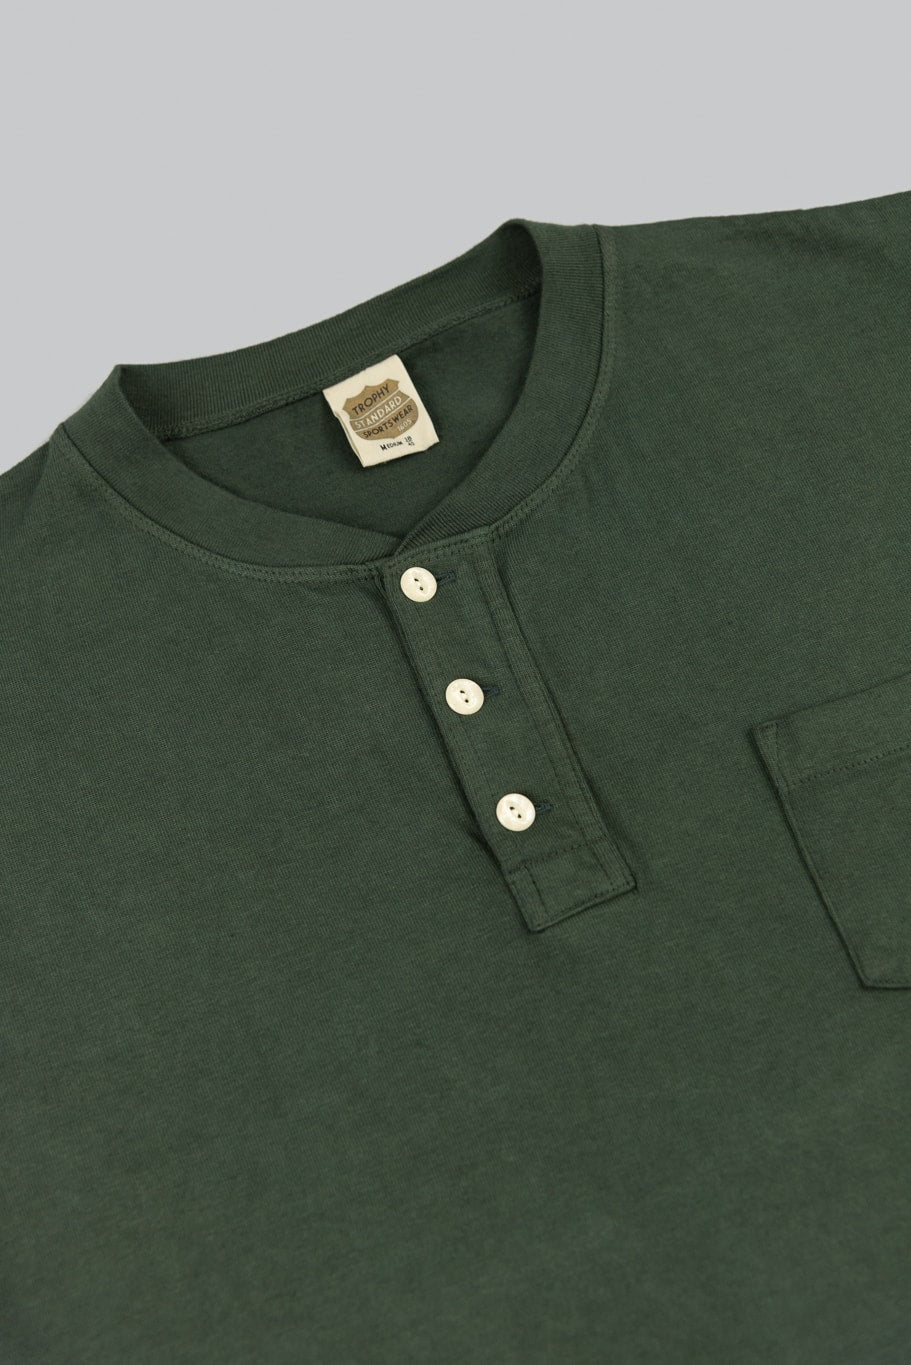 trophy clothing od henley tee olive collar buttons